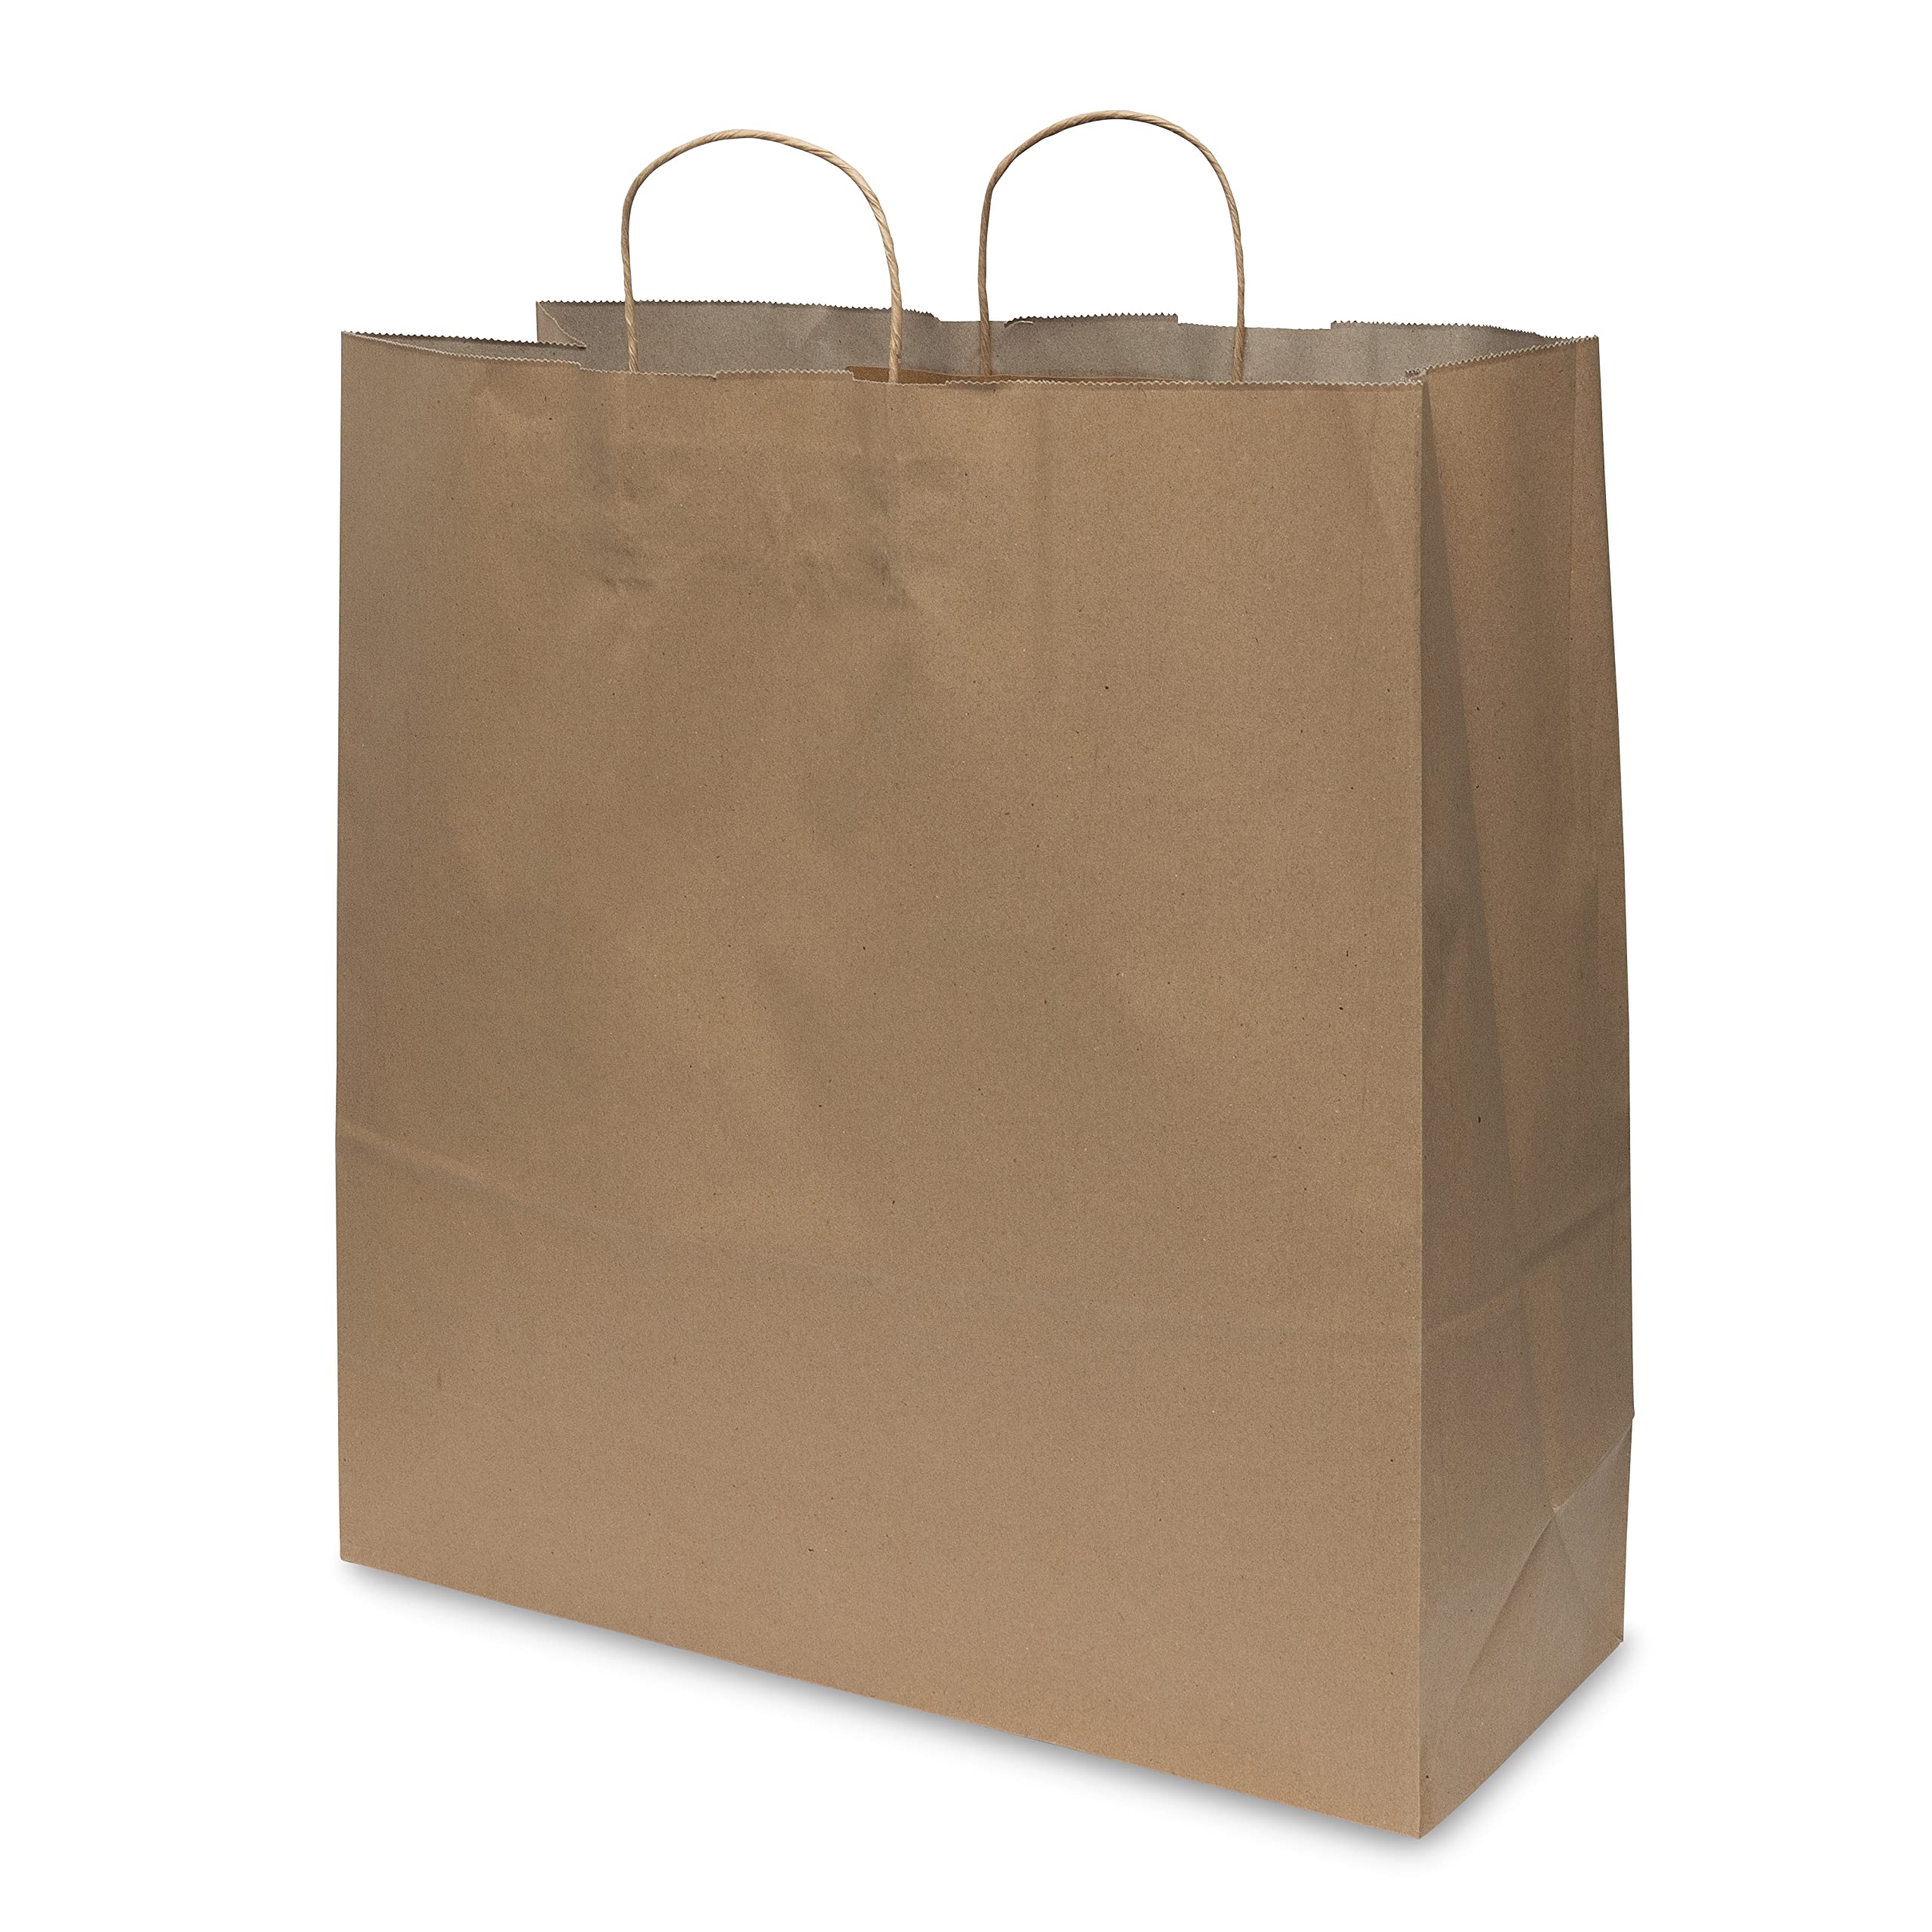 Brown Paper Bags with Handles - 18x7x18.75 Inch 100 Pack Large Plain Brown Paper Bags, Durable Kraft Paper for Retail Stores, Small Business, Shopping, Crafts, Gifts, Grocery items, in Bulk  - Like New